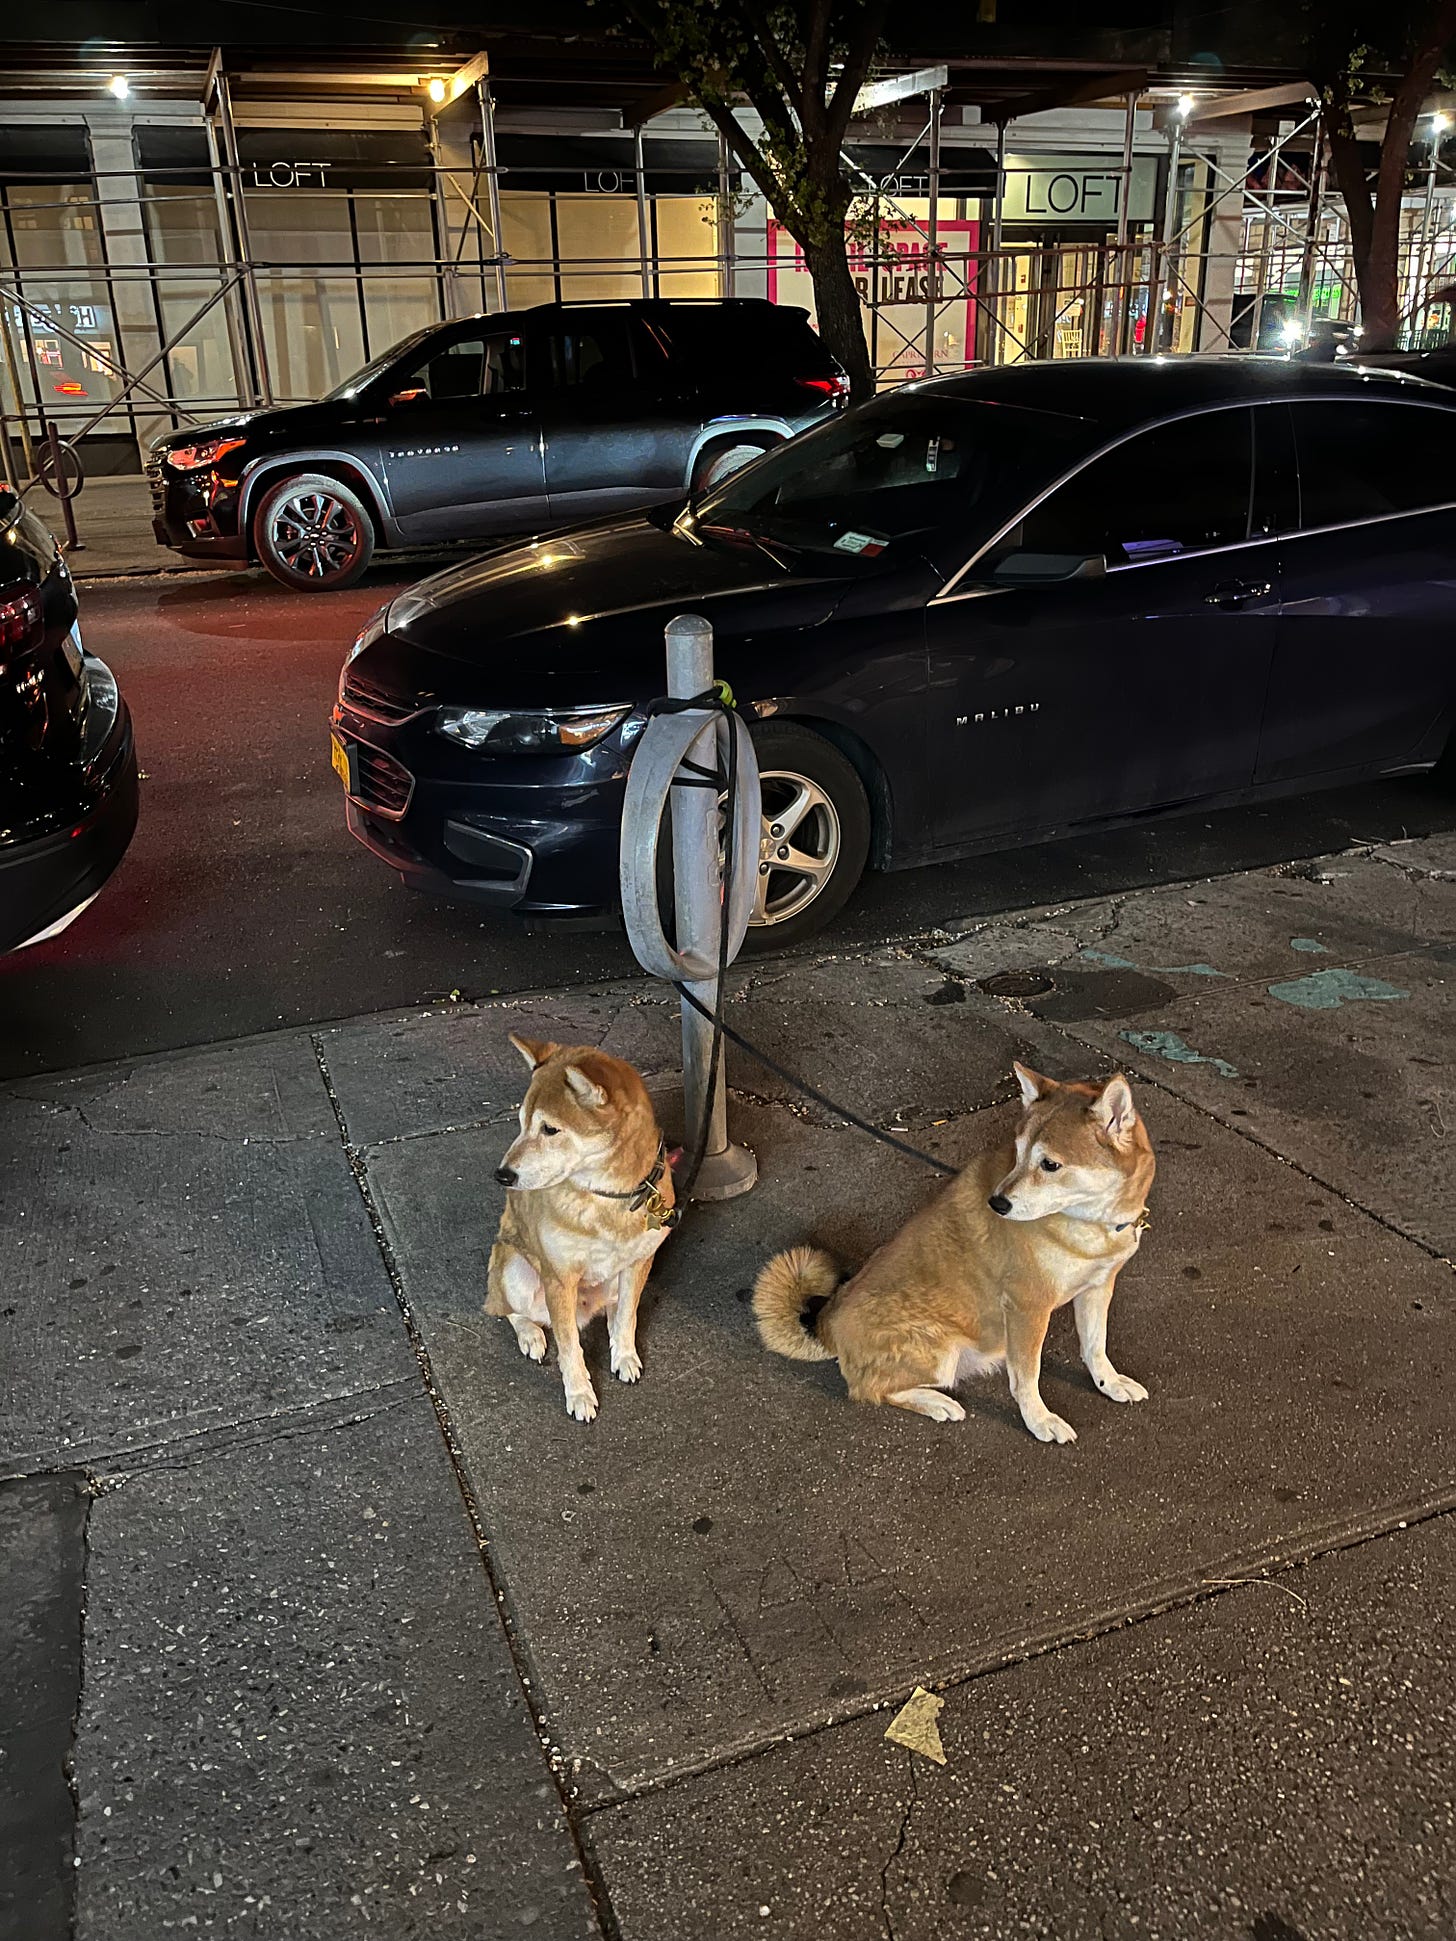 Picture taken at night of two matching dogs tied up outside a store. They are extremely cute!!!